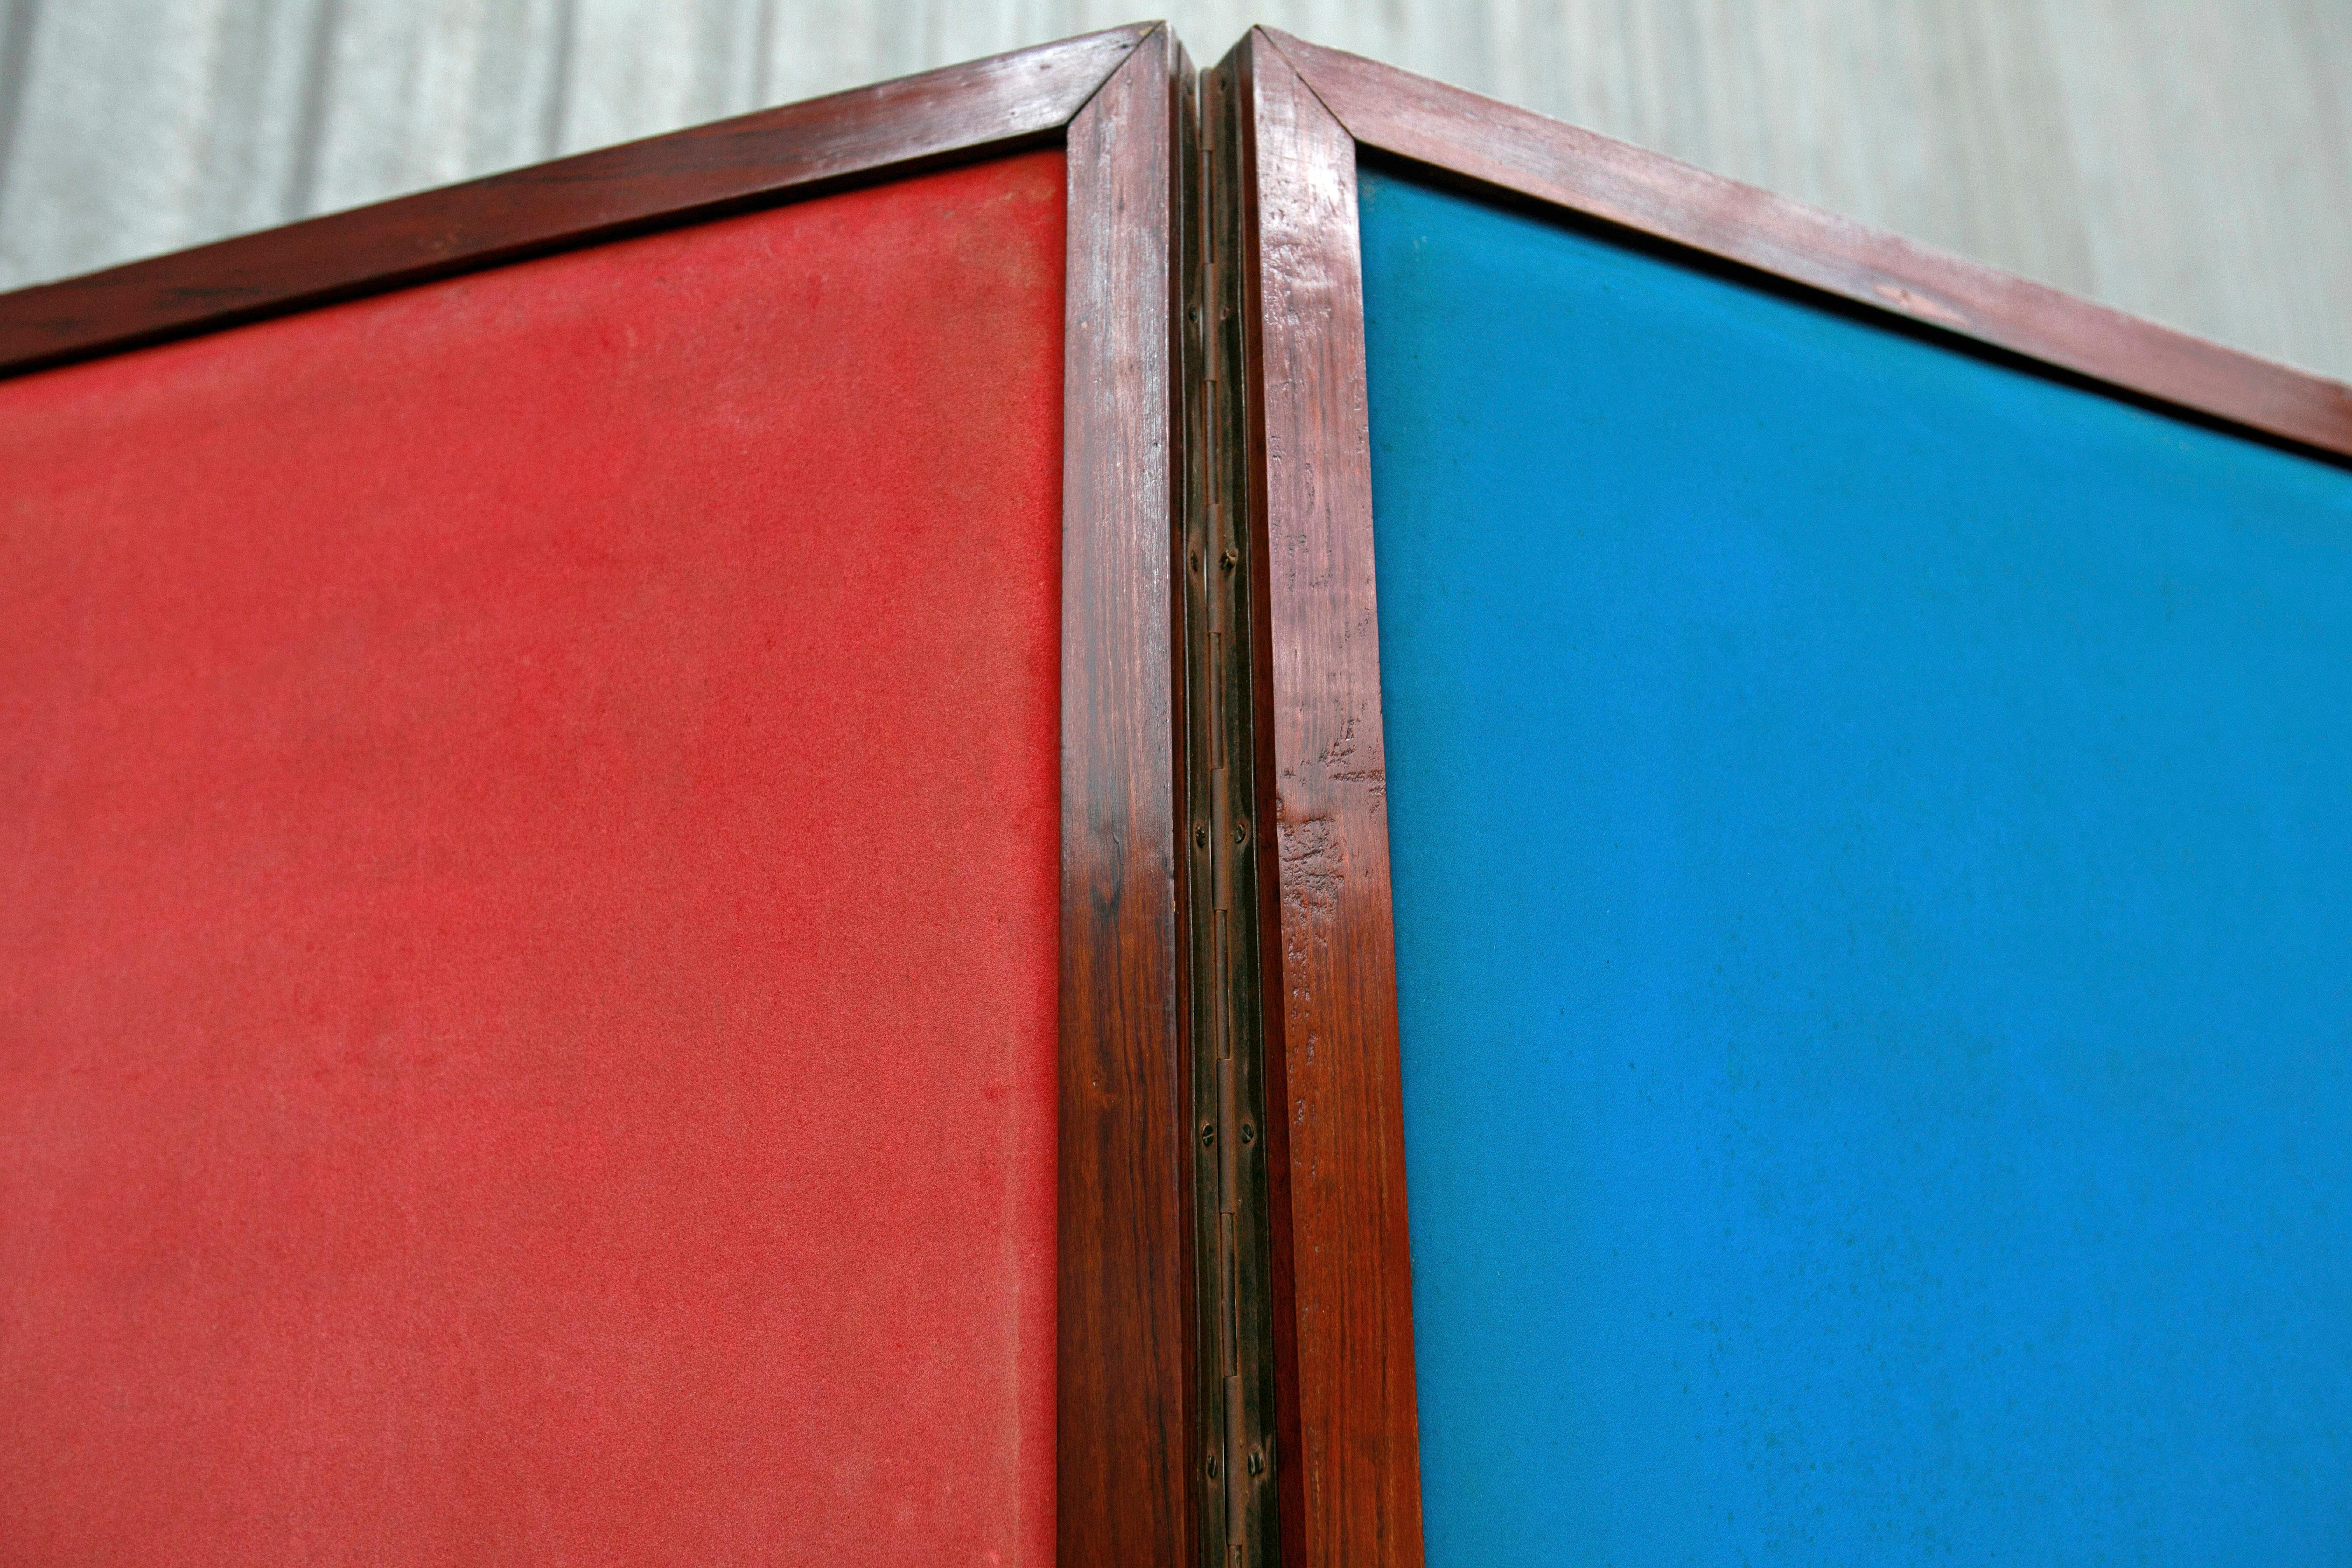 20th Century Brazilian Modern Room Divider in Hardwood & Leather by Sergio Rodrigues, 1960s For Sale